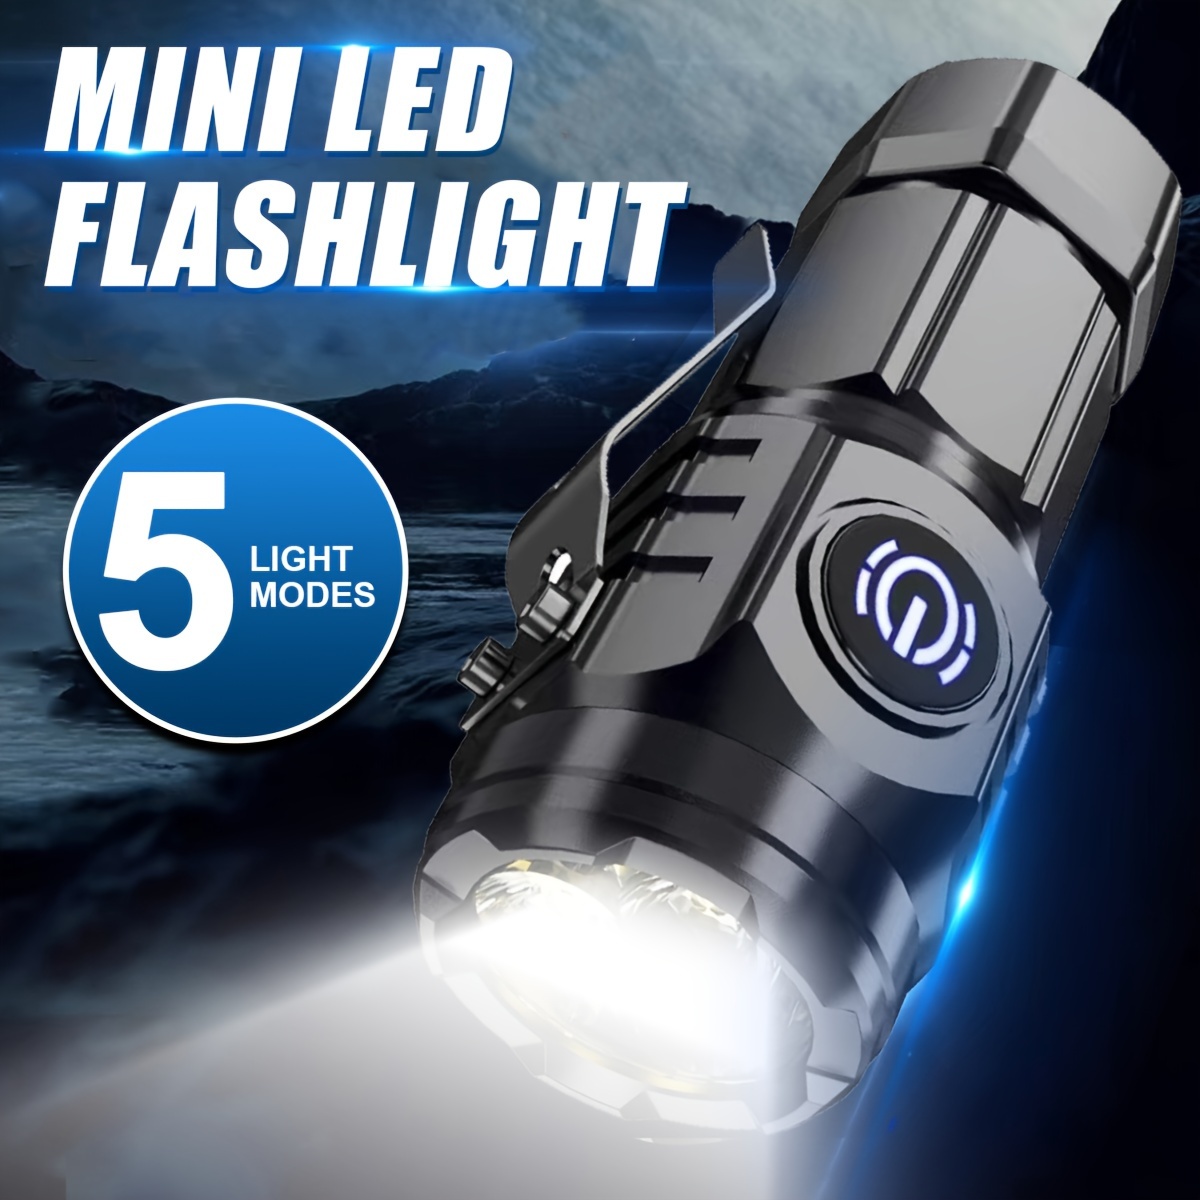 

Ultra-bright Mini Led Flashlight - Usb Rechargeable With 5 Modes, Durable & Portable For Camping, Outdoor Adventures & Car Emergencies